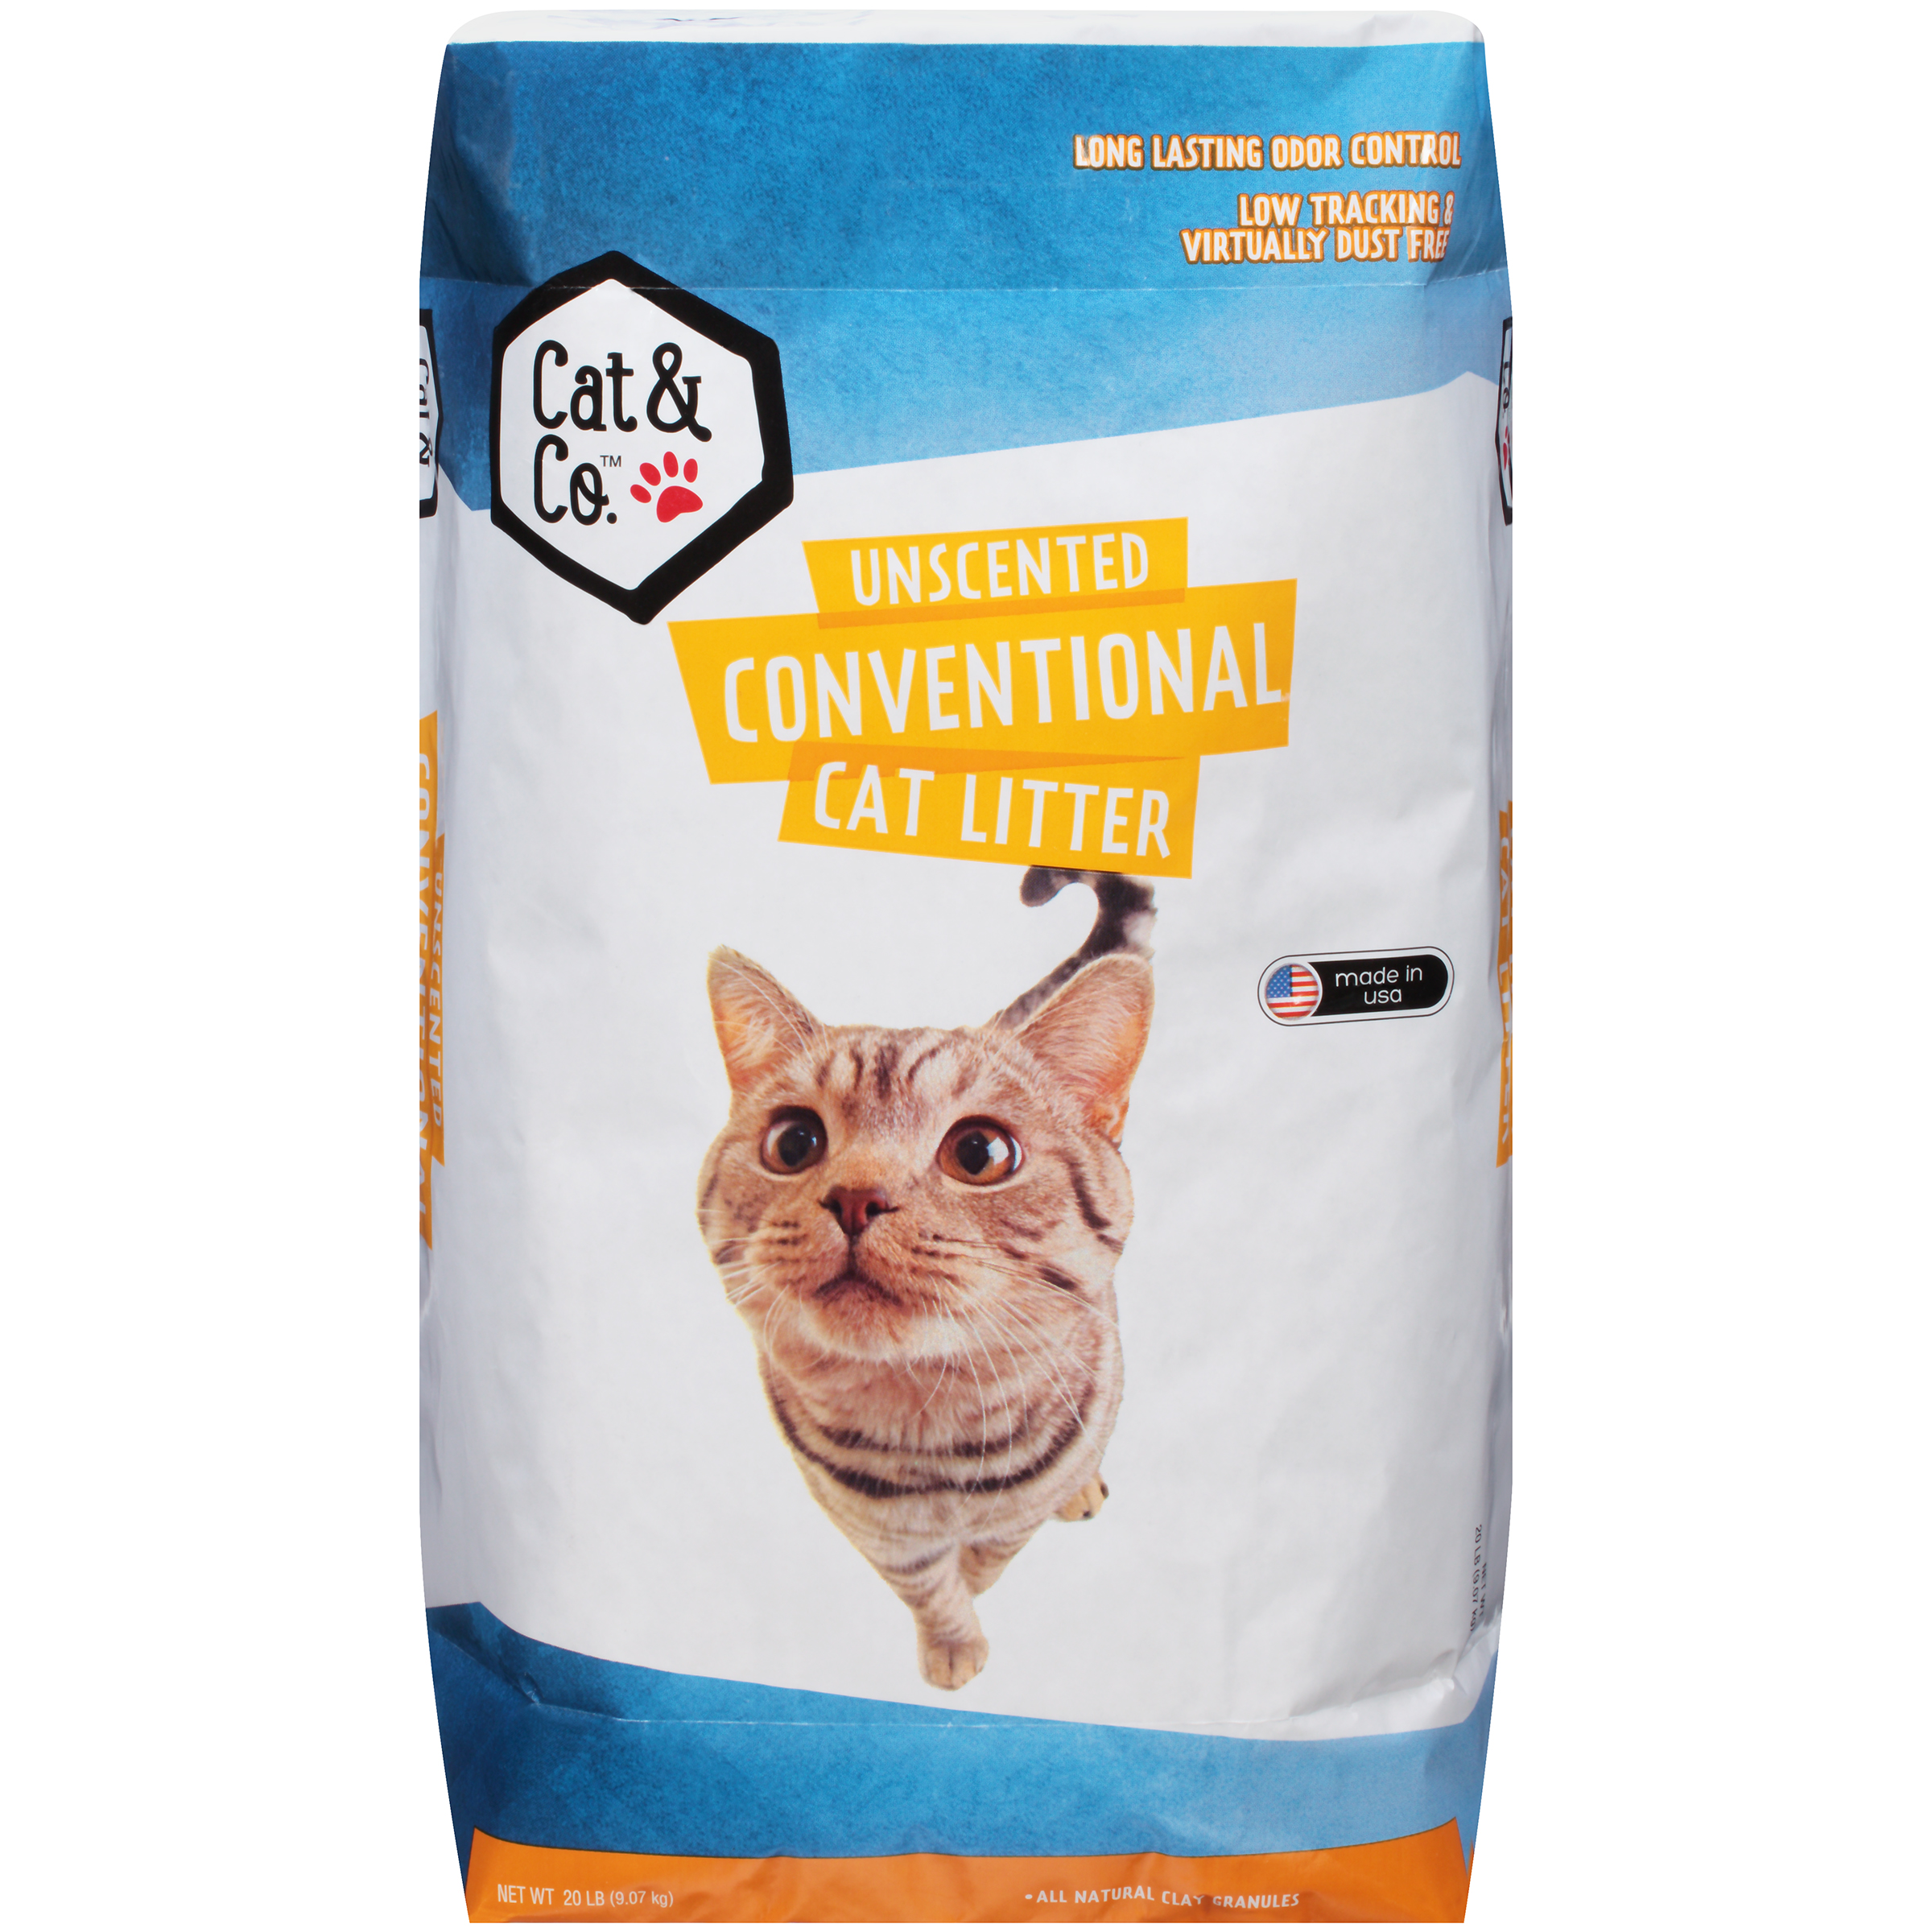 Cat & Co. Unscented Conventional, Cat Litter, 20 Lb